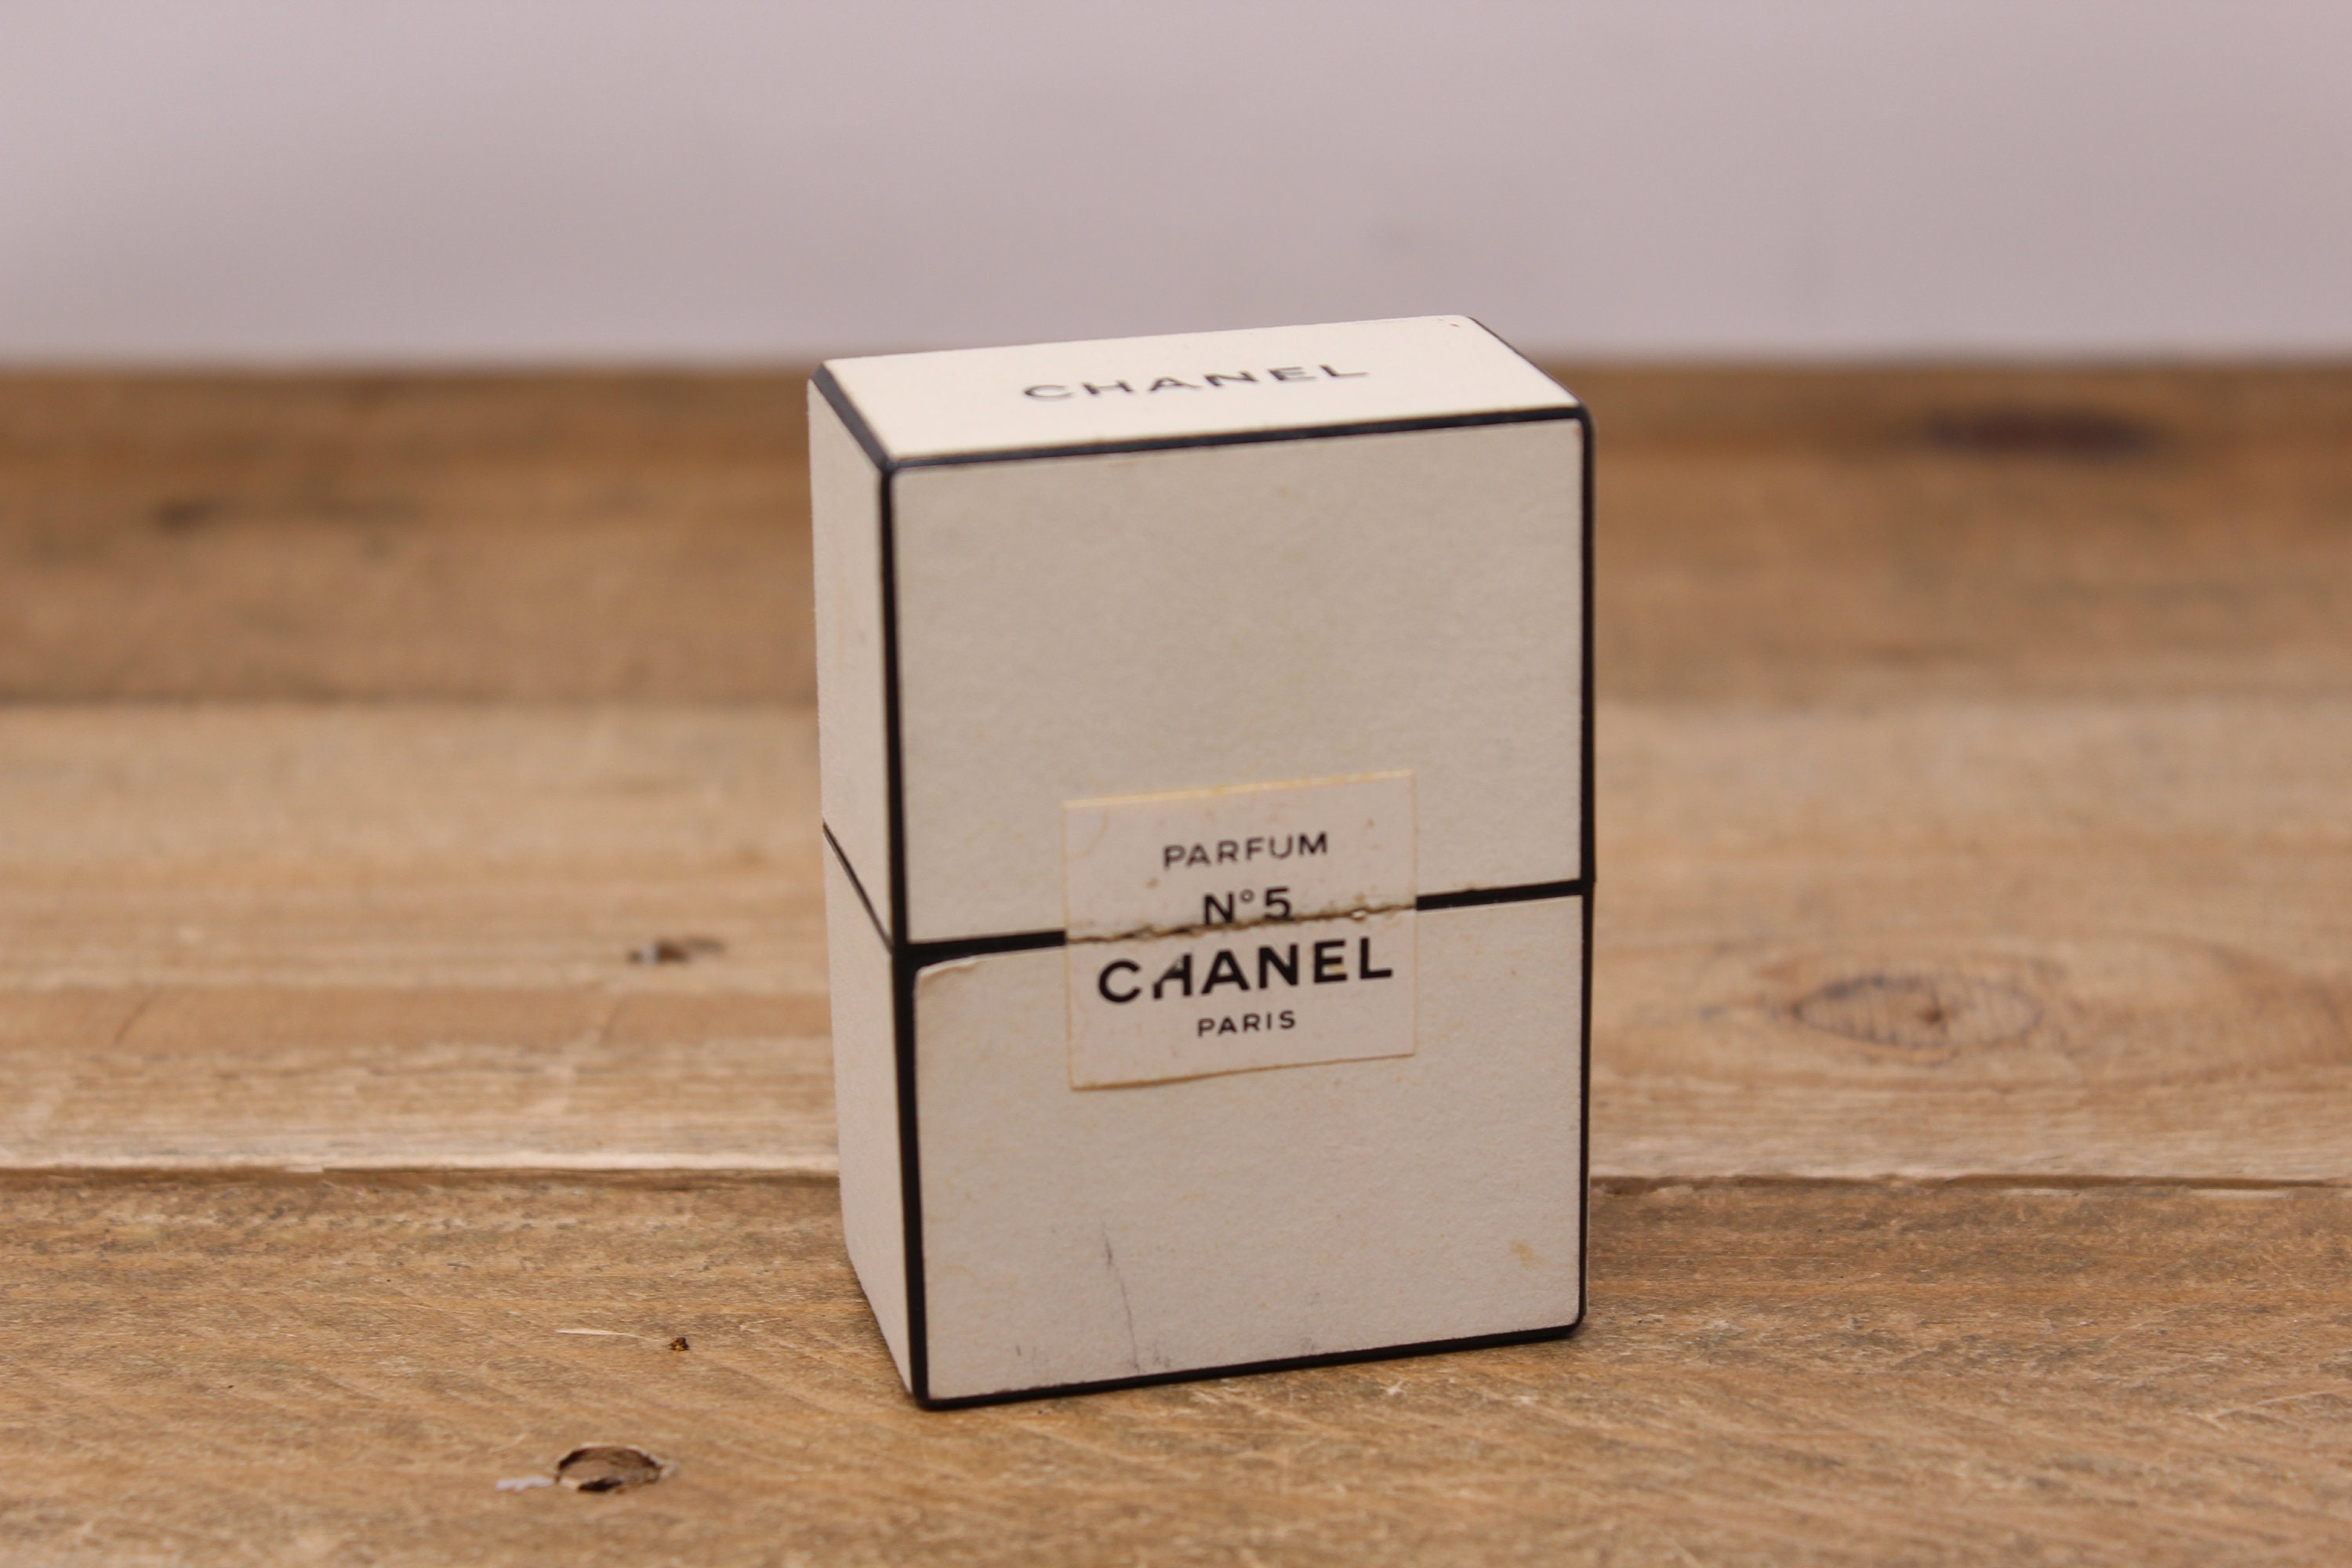 Chanel Empty Boxes 